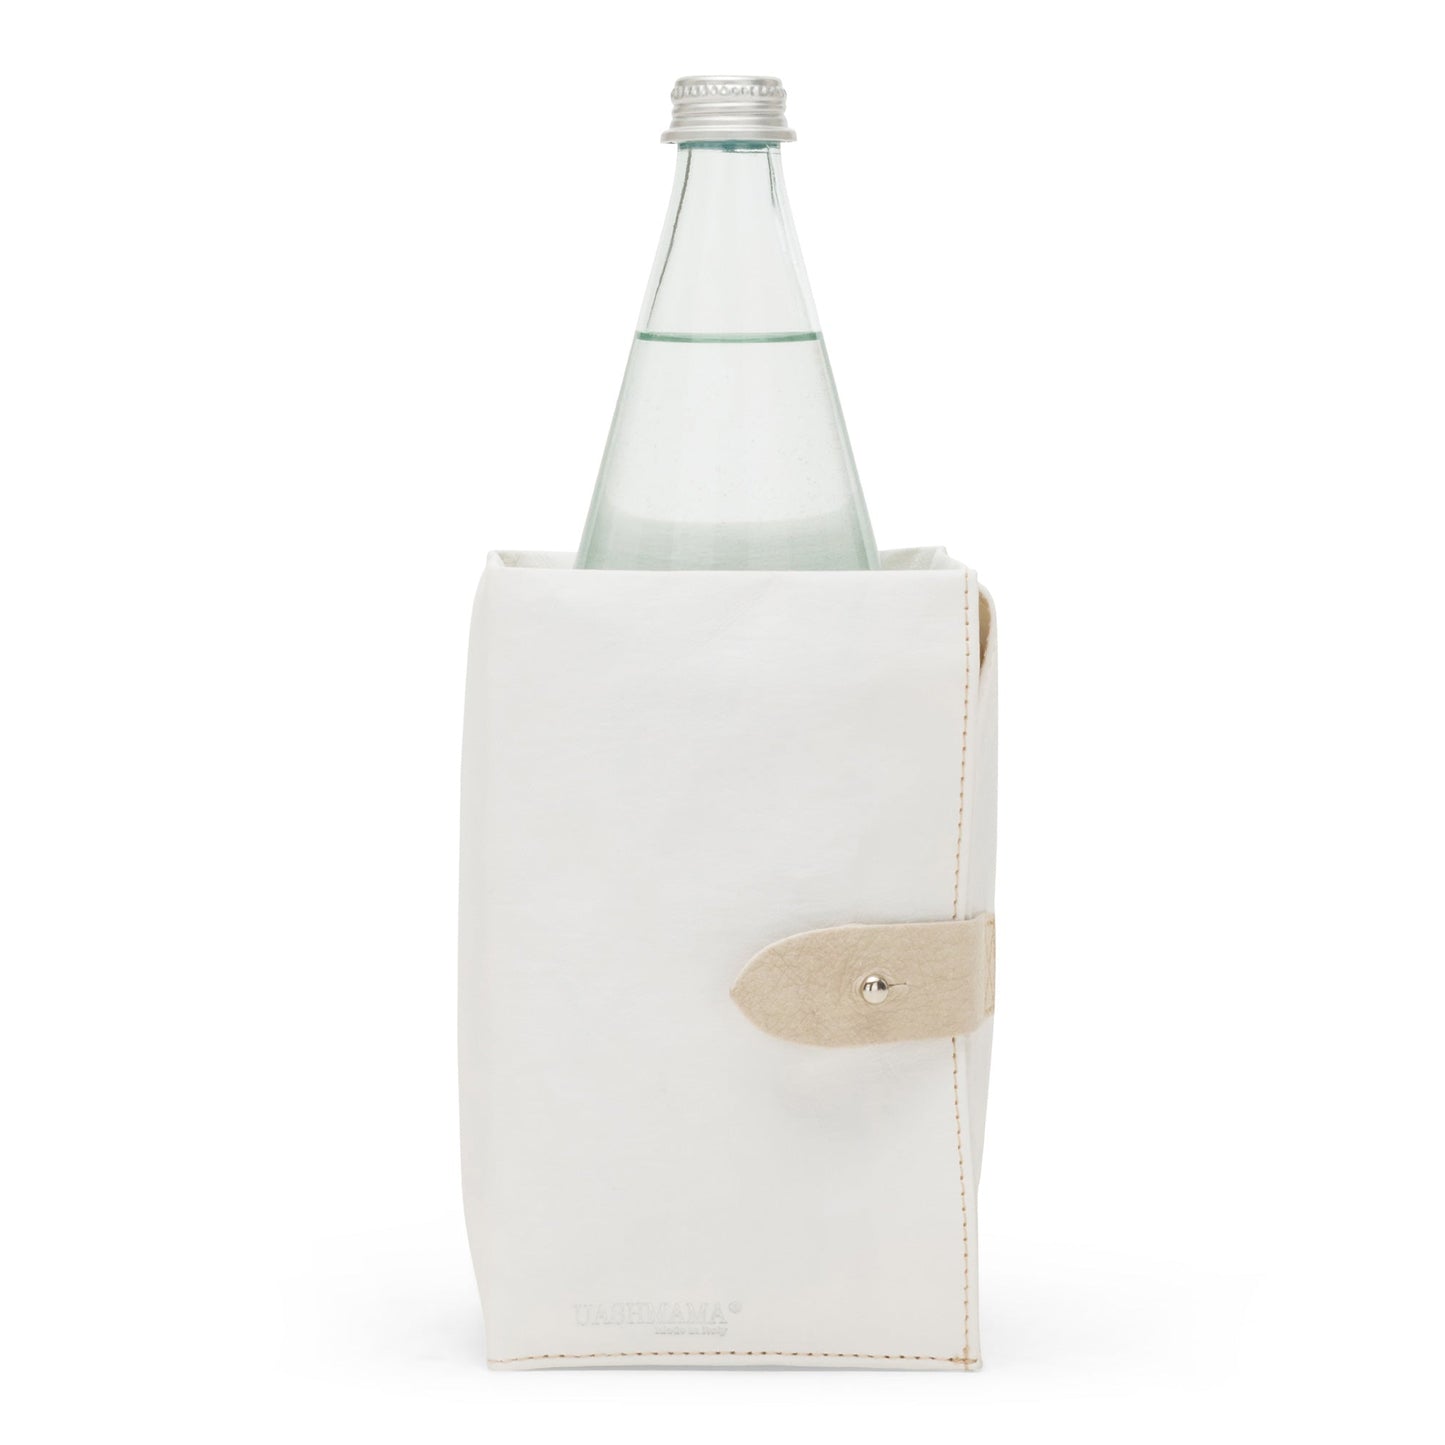 A white washable paper cooler is shown with a washable paper side tab with silver stud. It contains a glass water bottle.